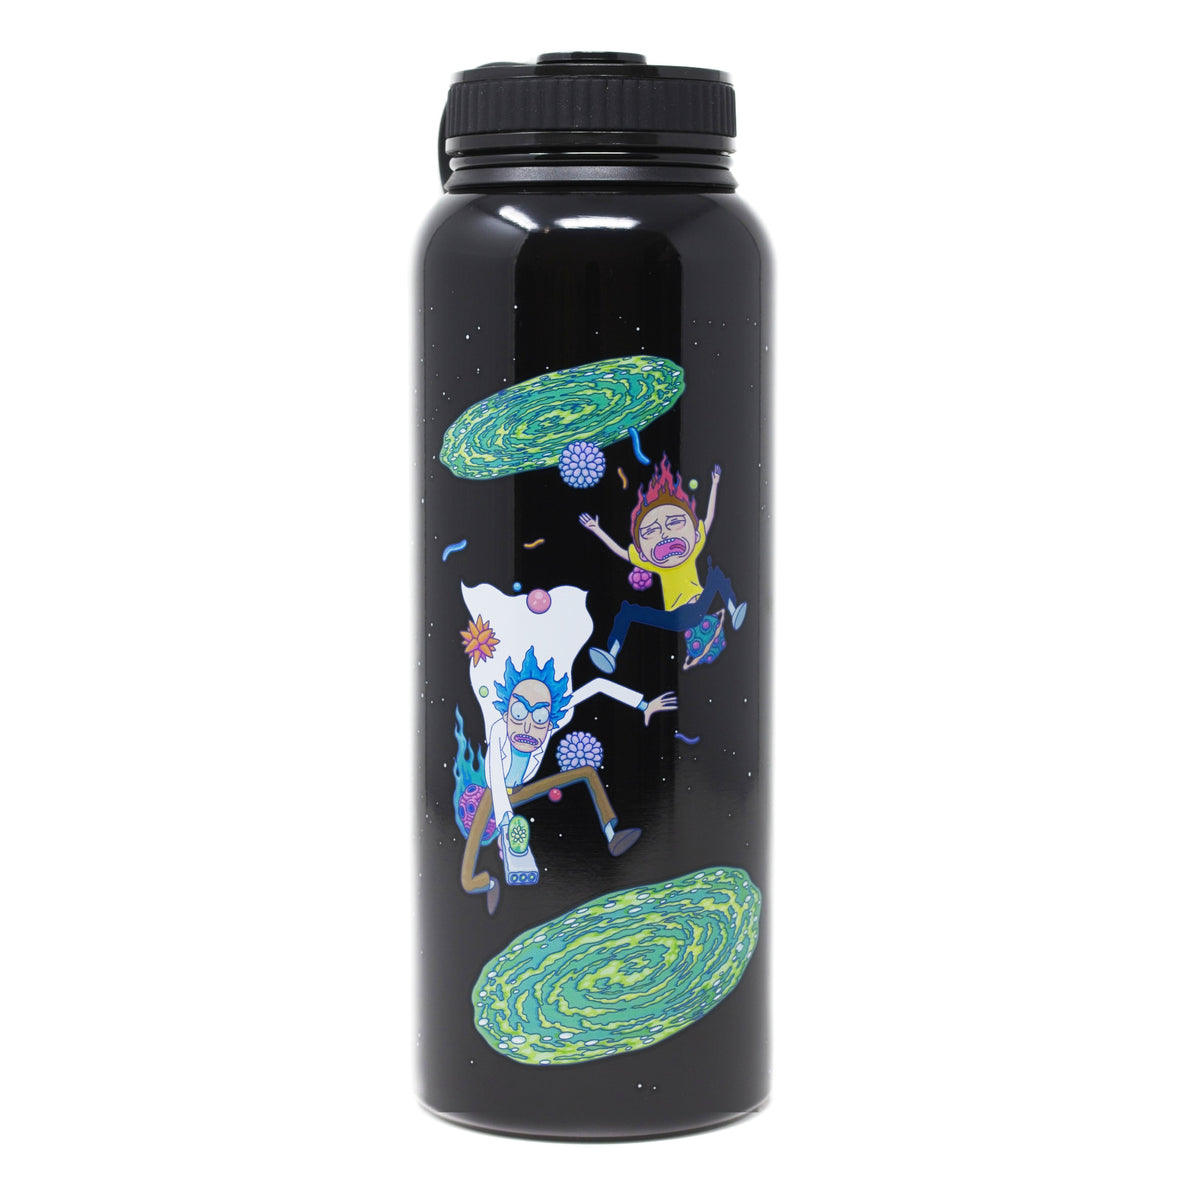 Rick and Morty 42oz Stainless Steel Water Bottle W Twist Lid